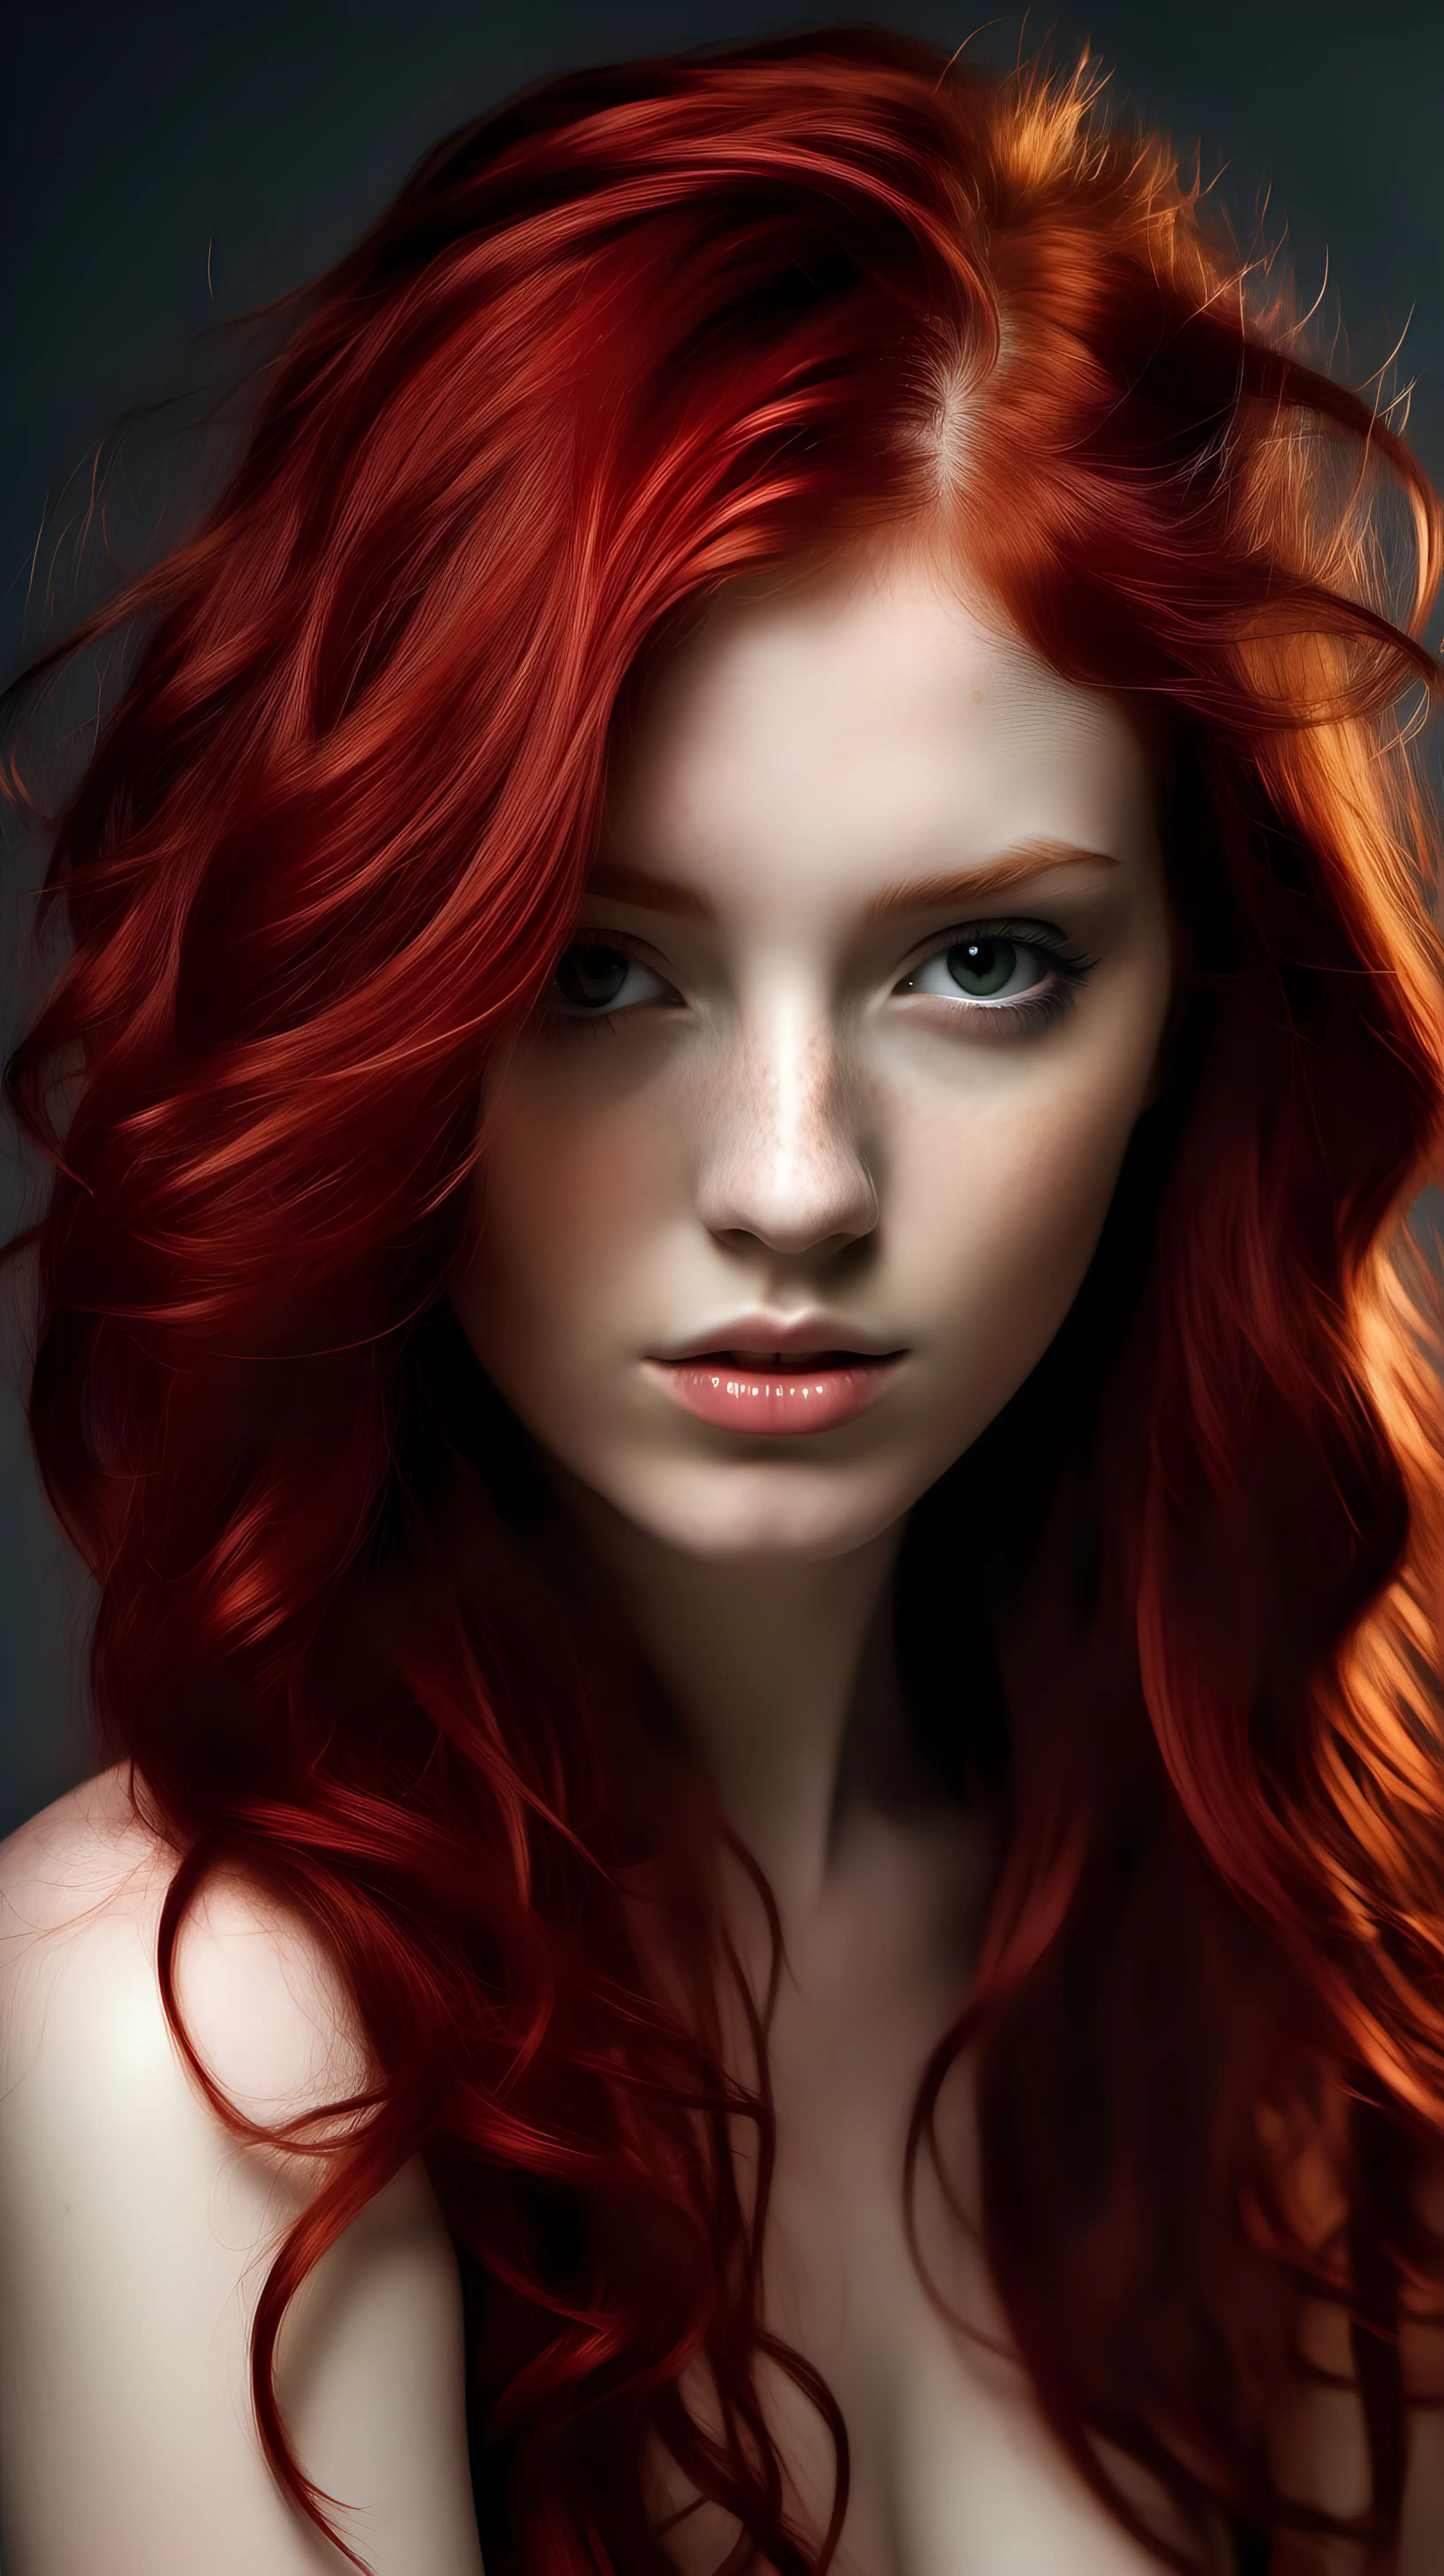 Captivating RedHaired Woman in Artistic Pose